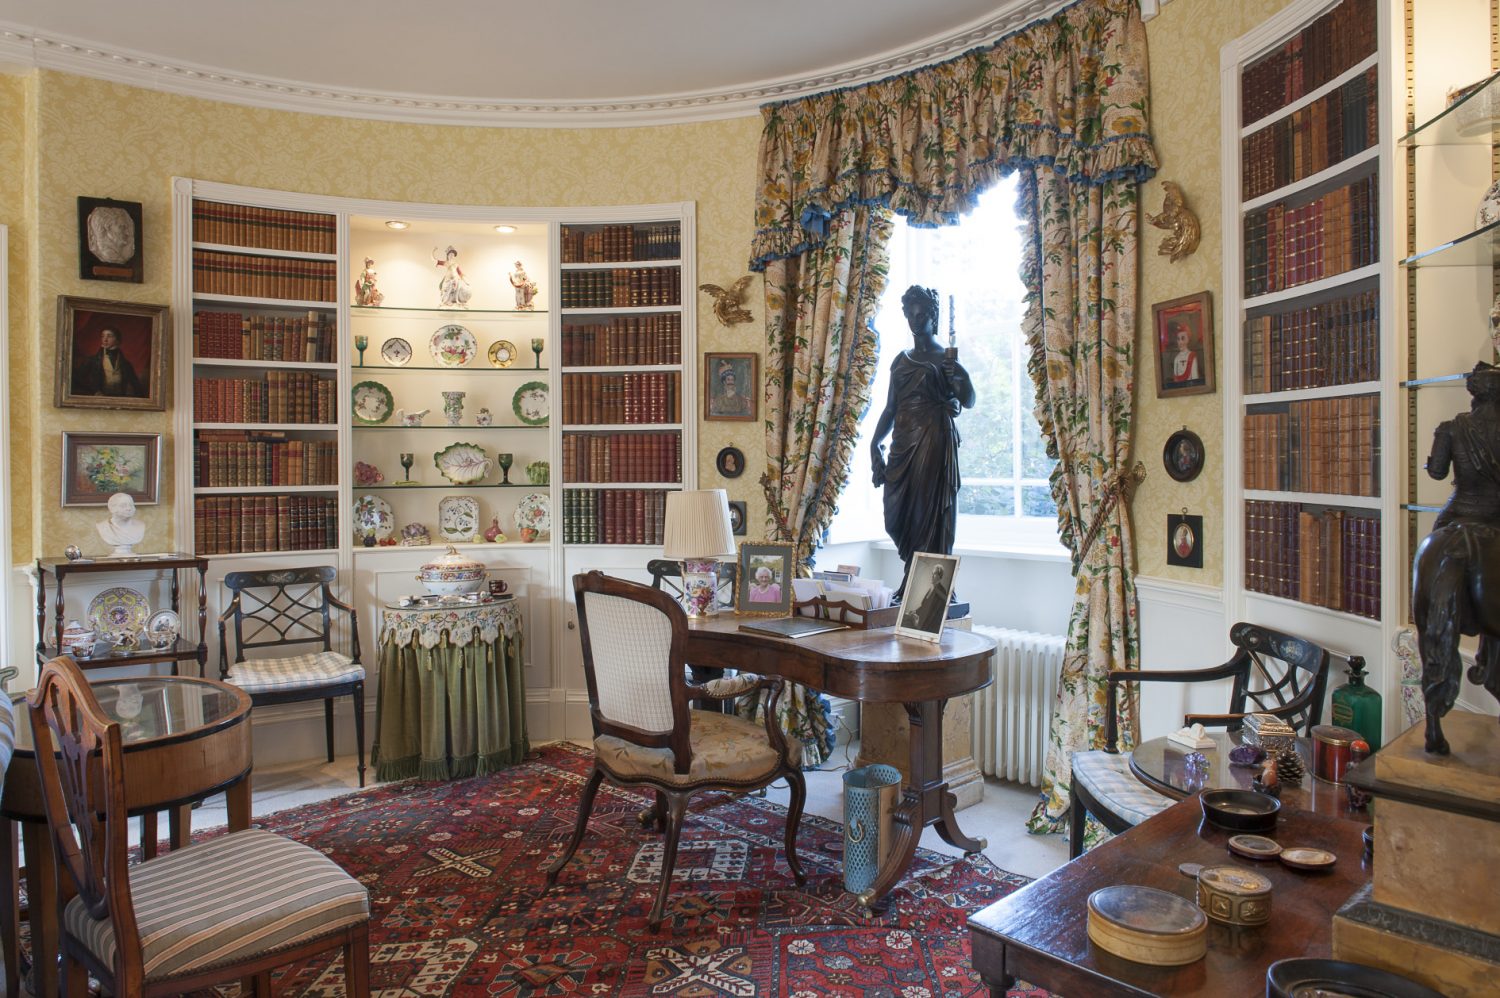 Today, the curved walls of the drawing room, created by a vicar in the nineteenth century, have bookshelves with hidden doors that silently open when pressed in the right spot